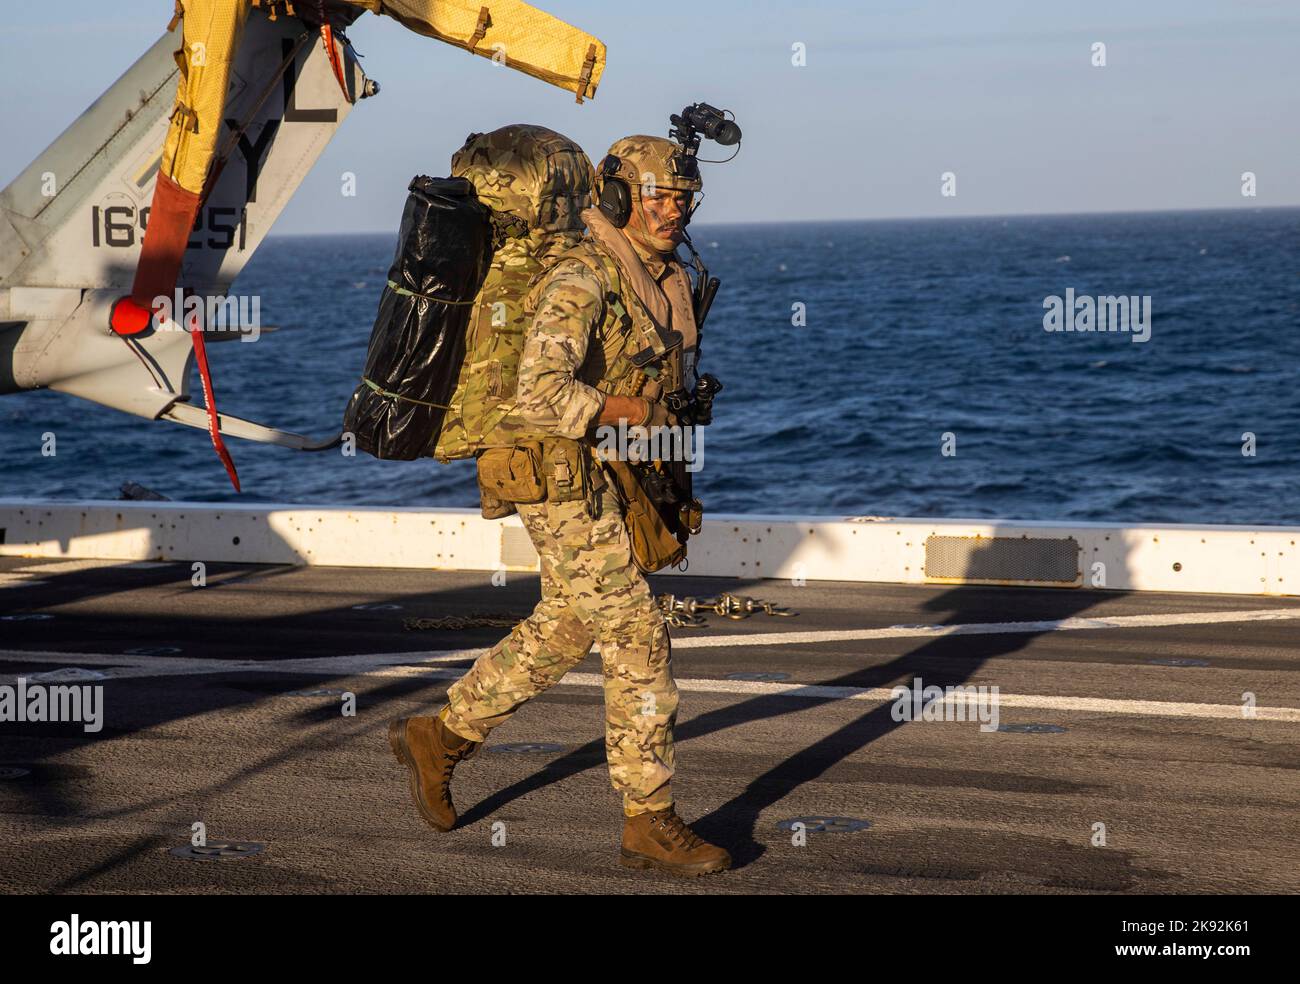 PACIFIC OCEAN (Aug. 7, 2022) - A British Royal Marine Commando makes his way to a CH-53E Super Stallion on the flight deck of amphibious transport dock USS Anchorage (LPD 23) before conducting a reconnaissance and surveillance exercise, Aug. 7. The Marine Corps consistently trains alongside our allies to increase interoperability, exchanging tactics, techniques, and procedures. Marines and Sailors of the 13th Marine Expeditionary Unit (MEU) and Makin Island Amphibious Ready Group (ARG) are underway conducting integrated training operations in U.S. 3rd Fleet. (U.S. Marine Corps Photo by Sgt. Br Stock Photo